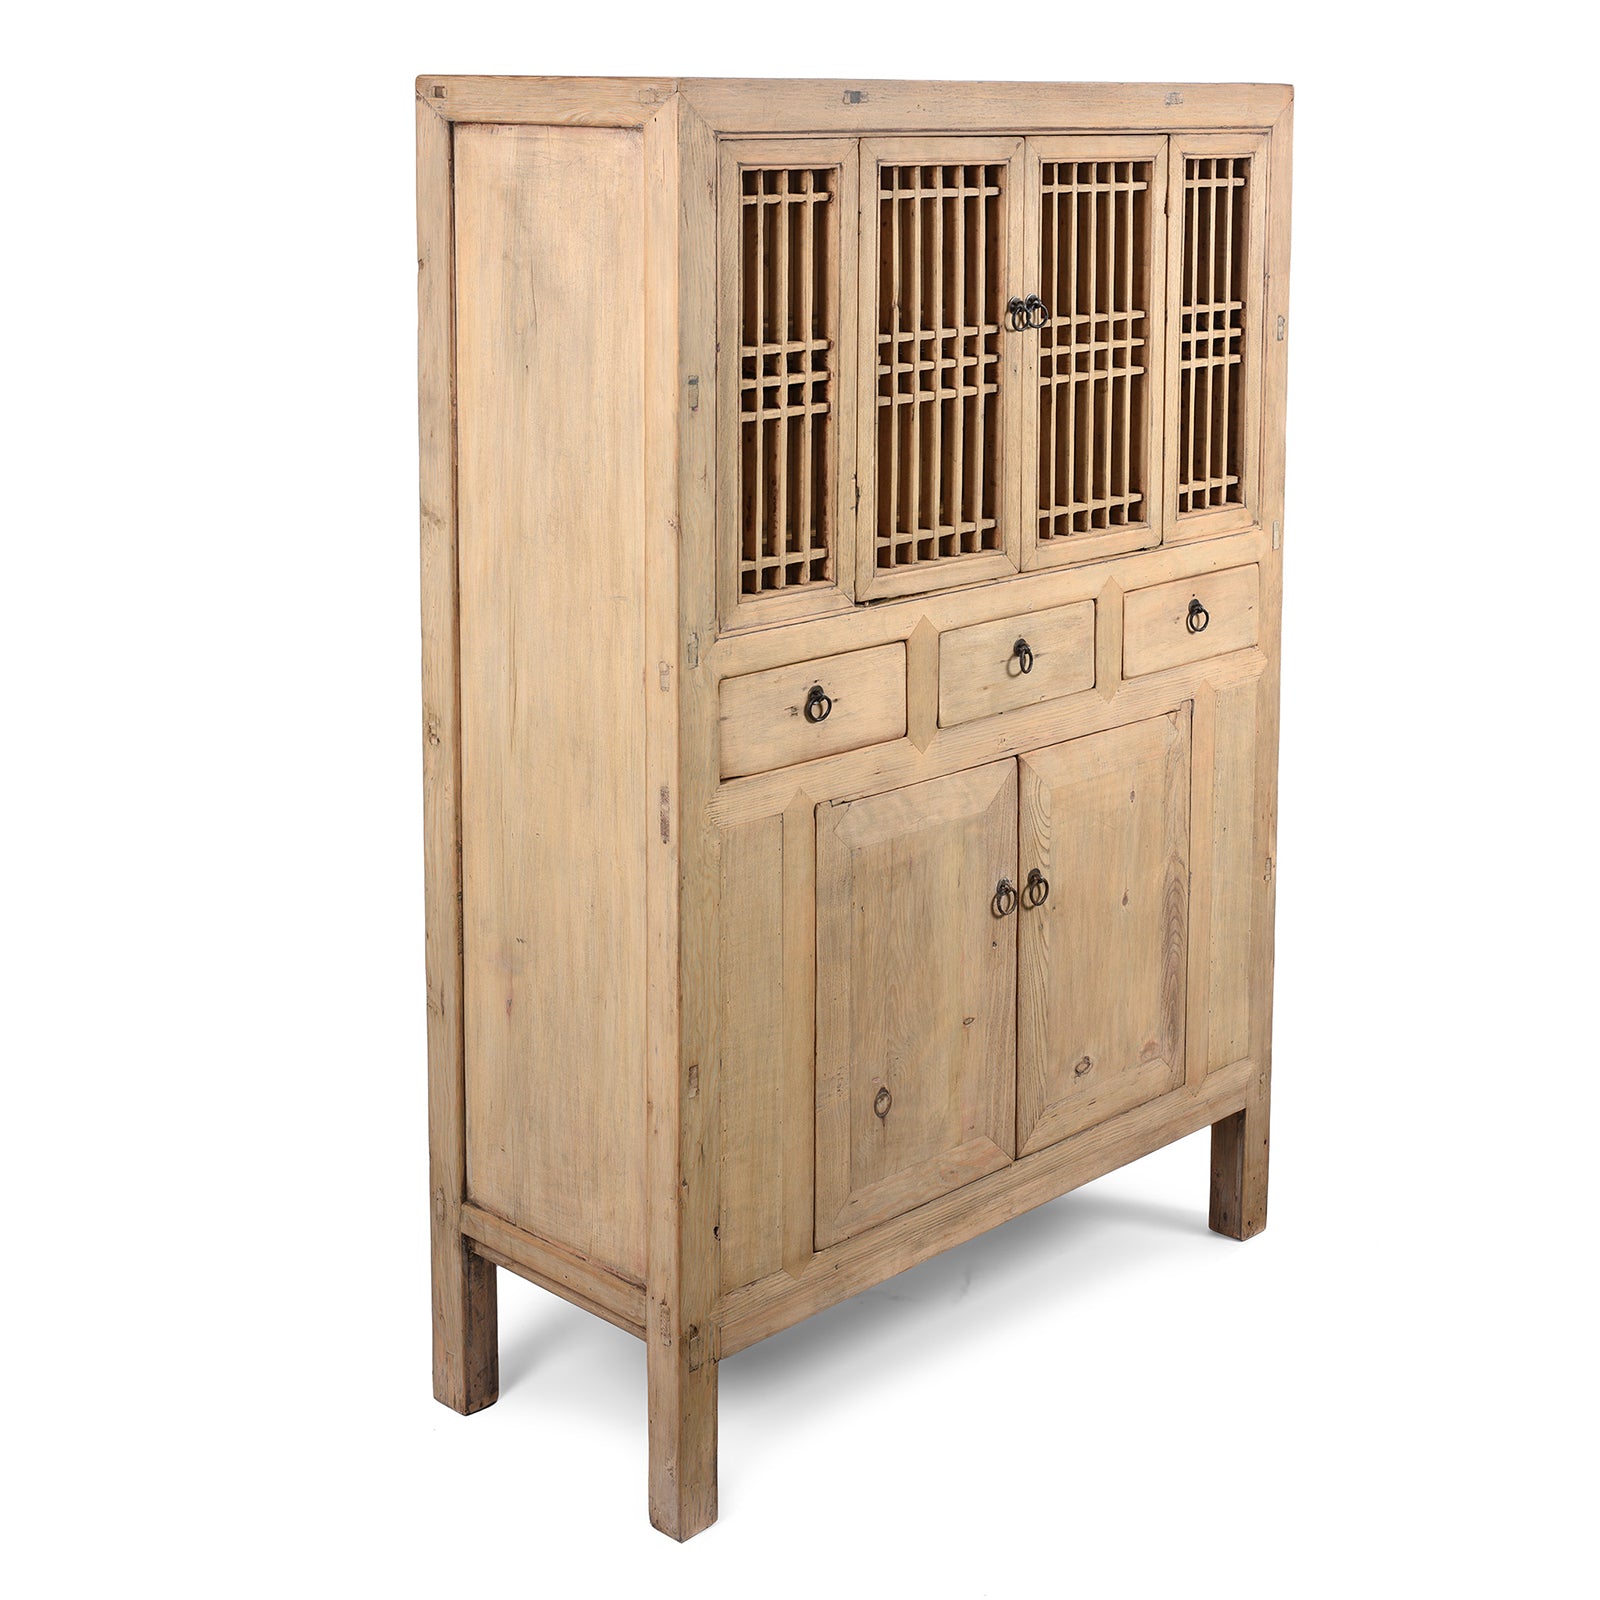 Antique Poplar Noodle Cabinet From Tianjin - 19th Century | Indigo Antiques